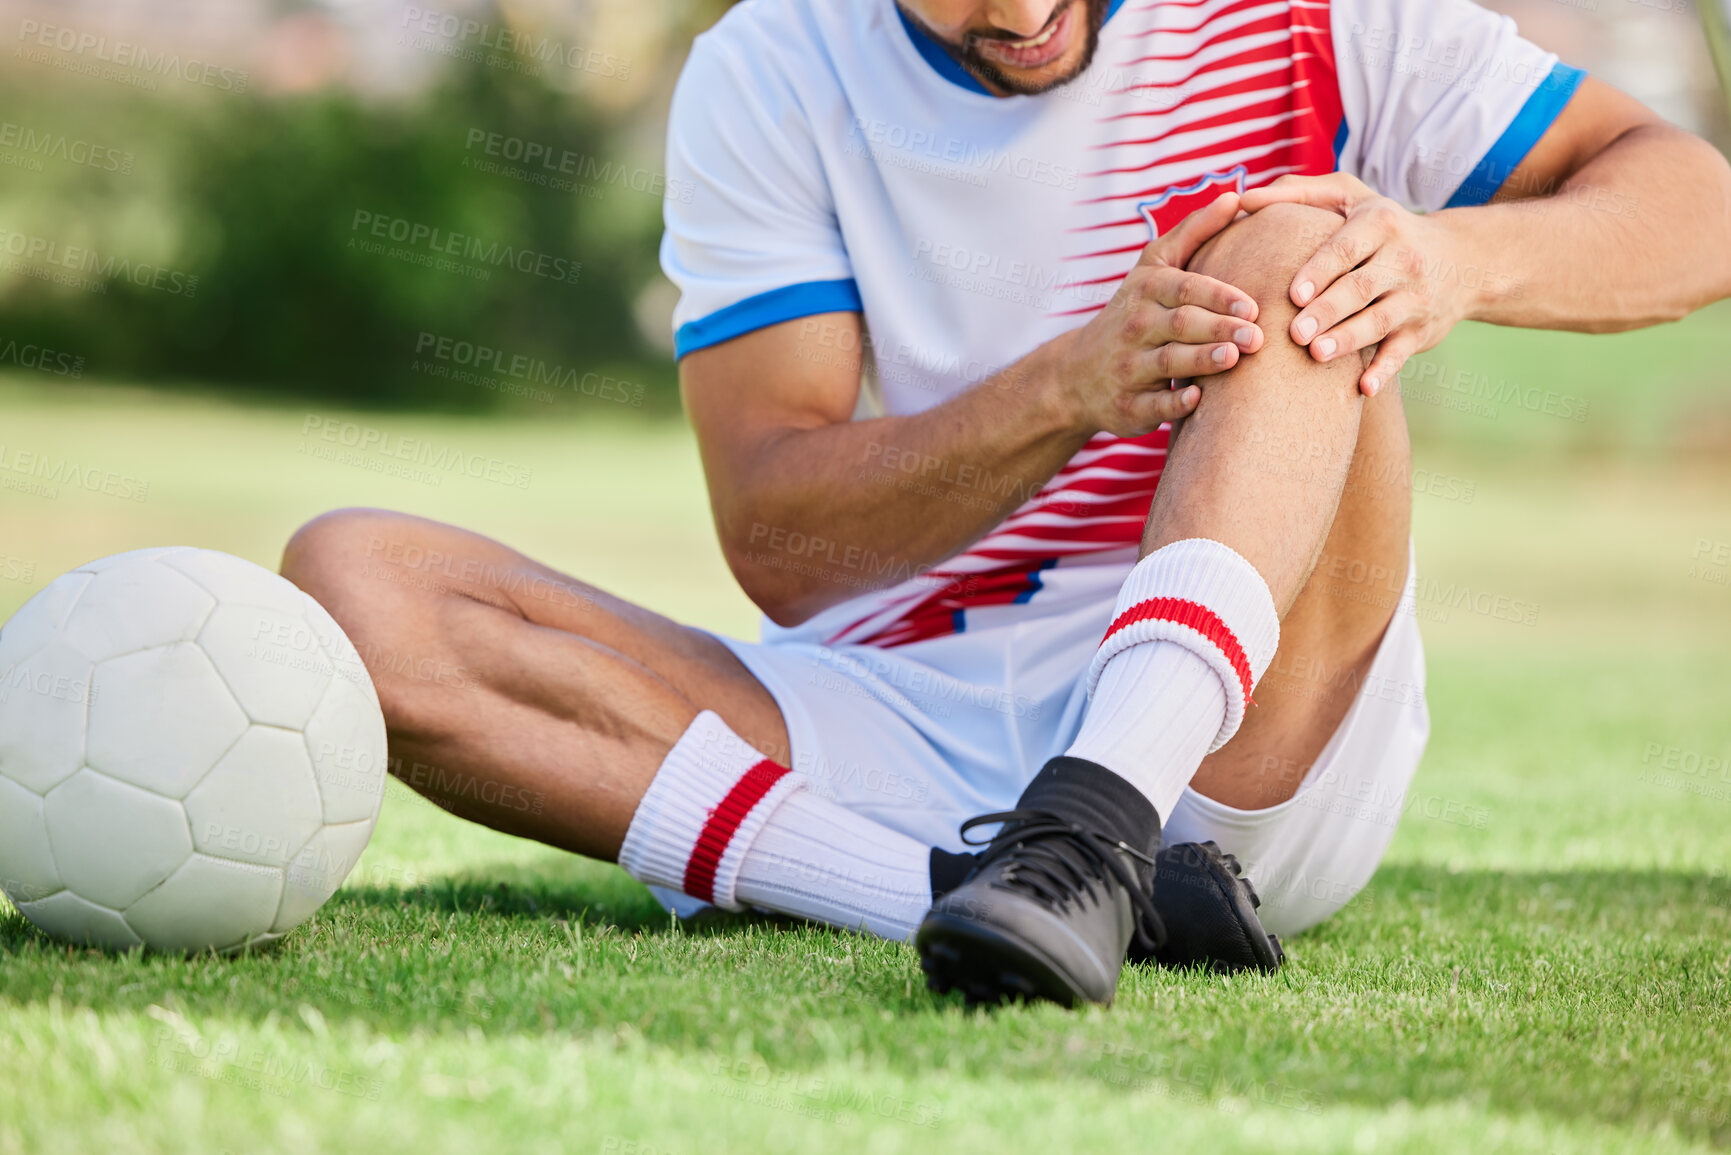 Buy stock photo Fitness, knee pain or soccer player with injury for football exercise, sports training or training on grass soccer field. Sport, soccer athlete or man on ground for health or medical workout accident